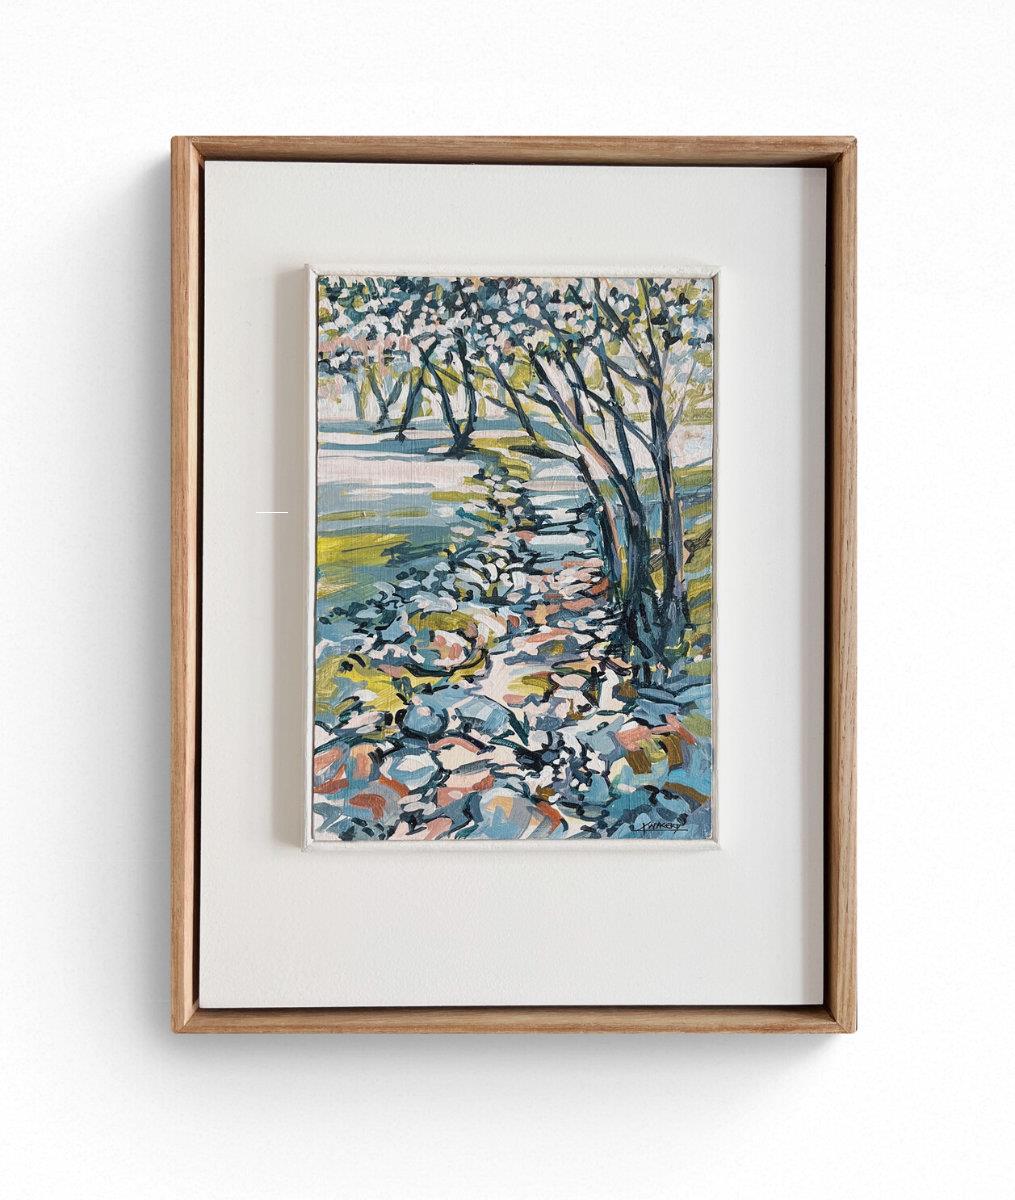 small framed painting of trees in a forest landscape